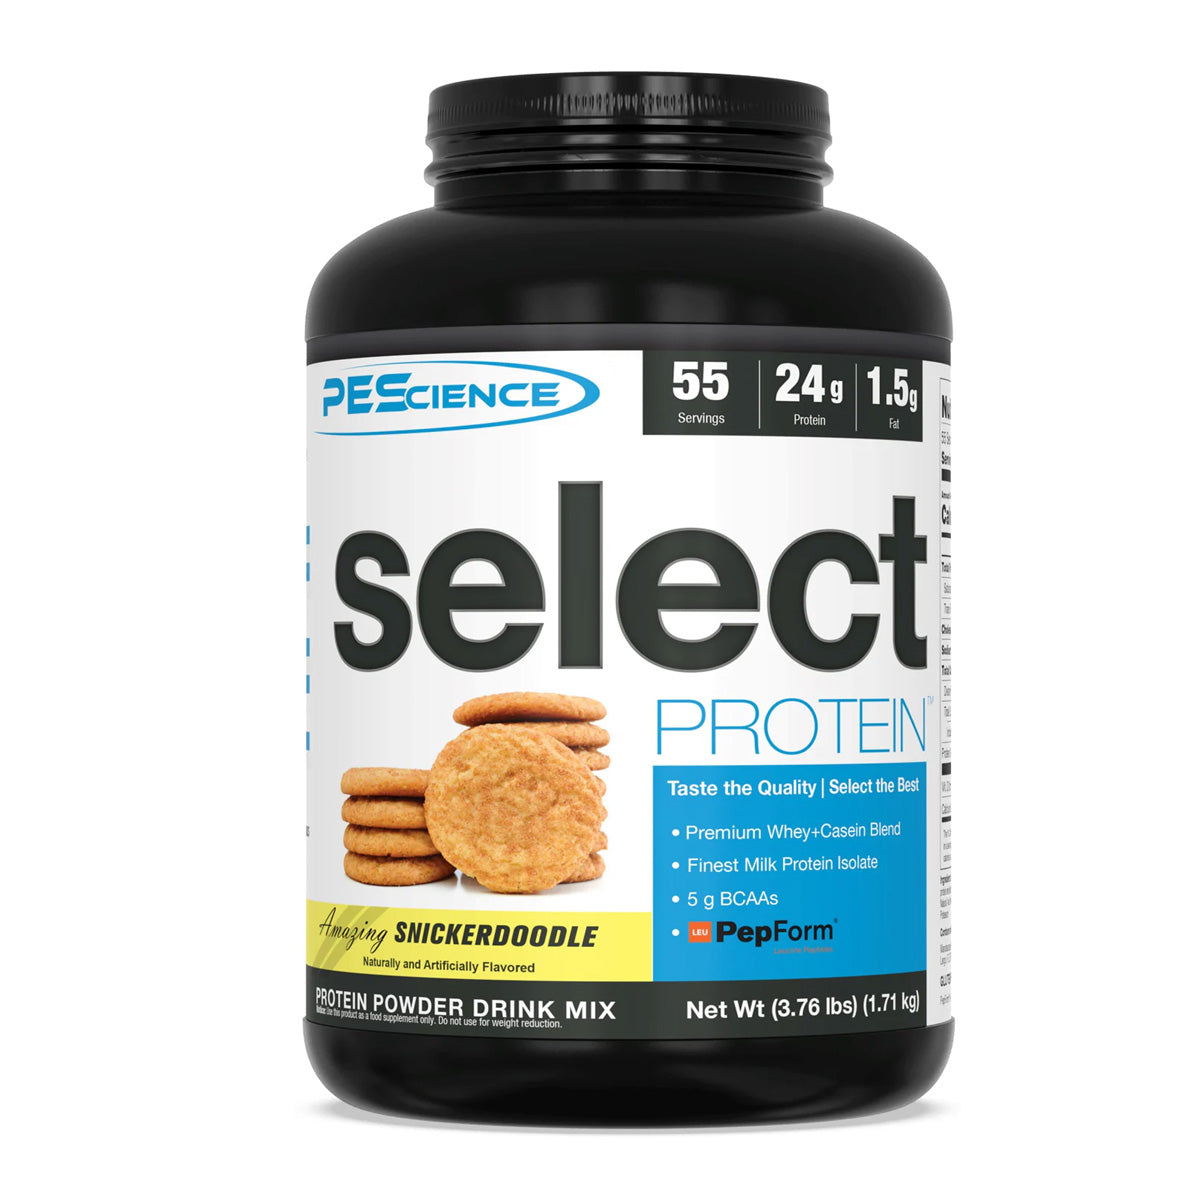 PES Select Protein 2lb